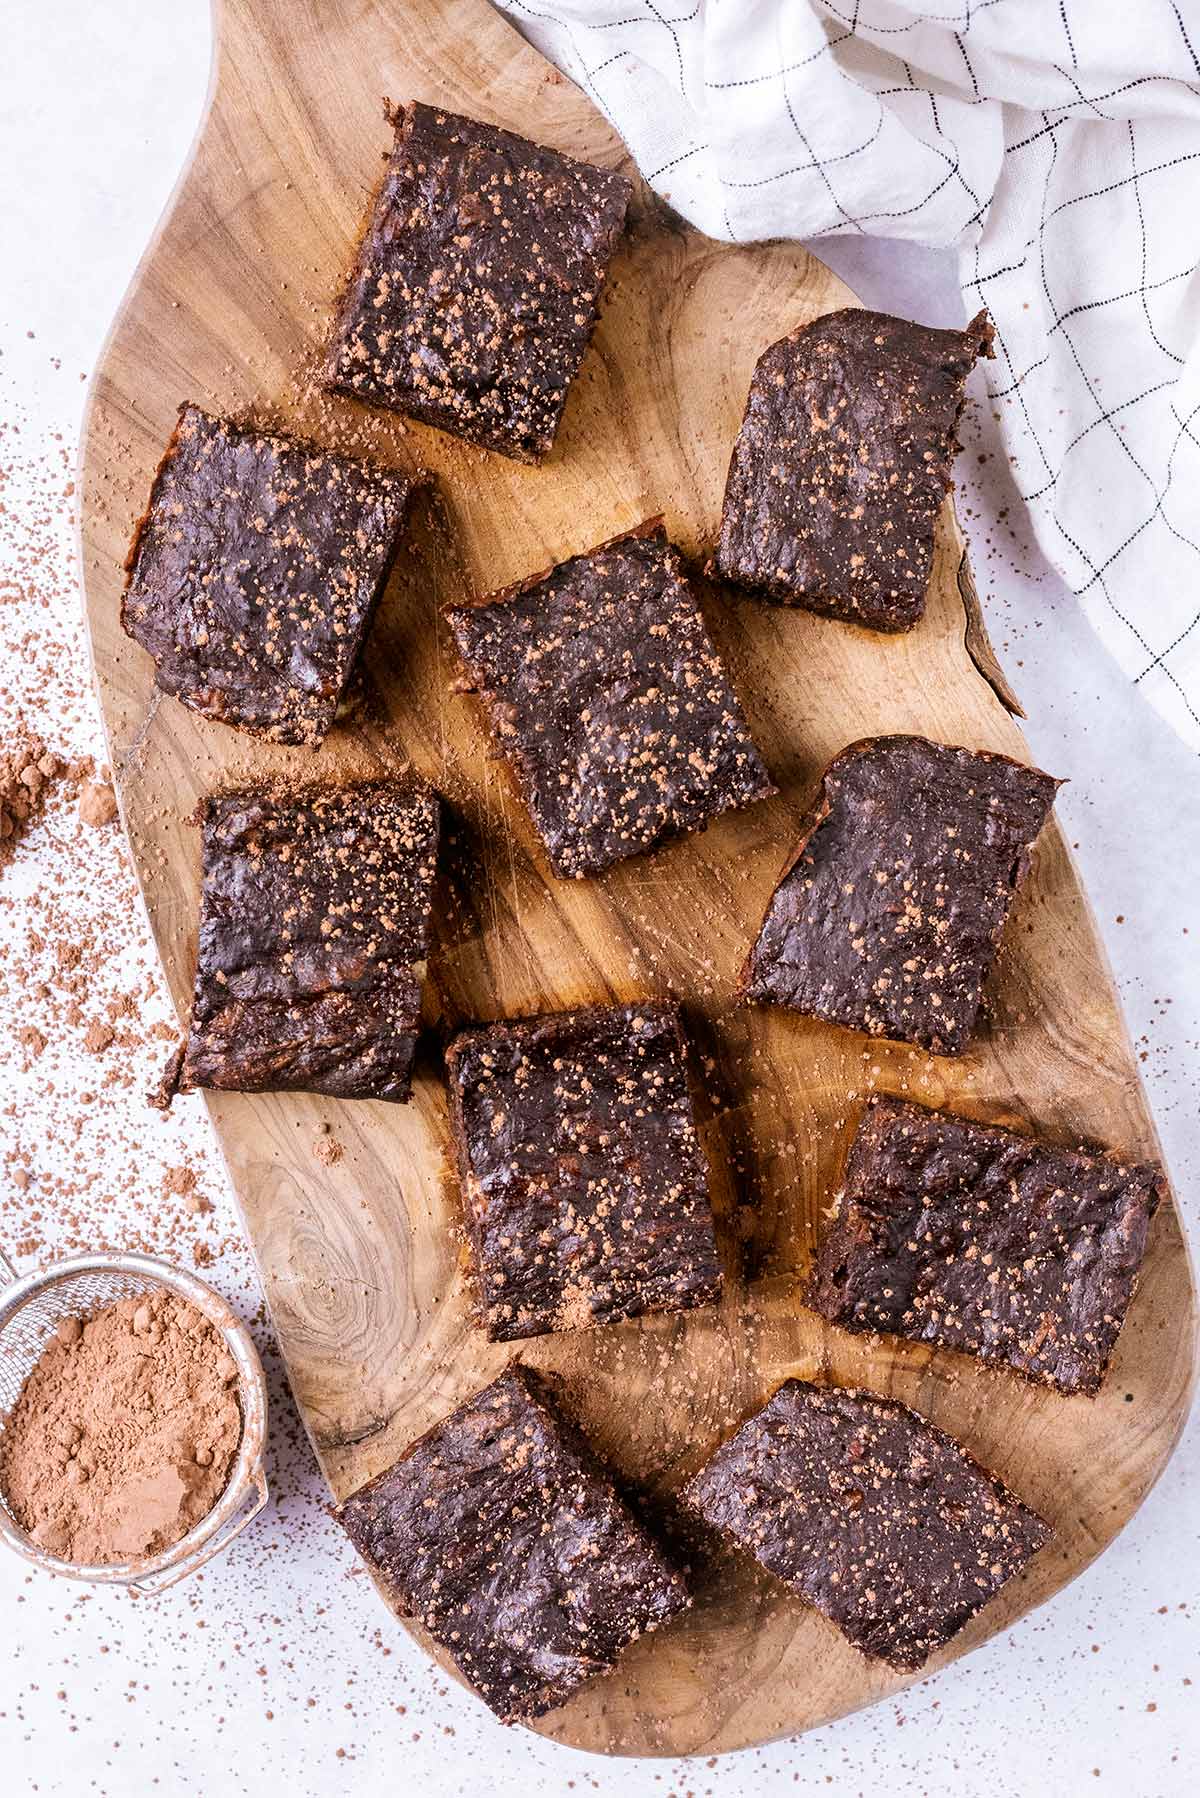 Ten brownies on a wooden serving board next to a small sieve of cocoa powder.